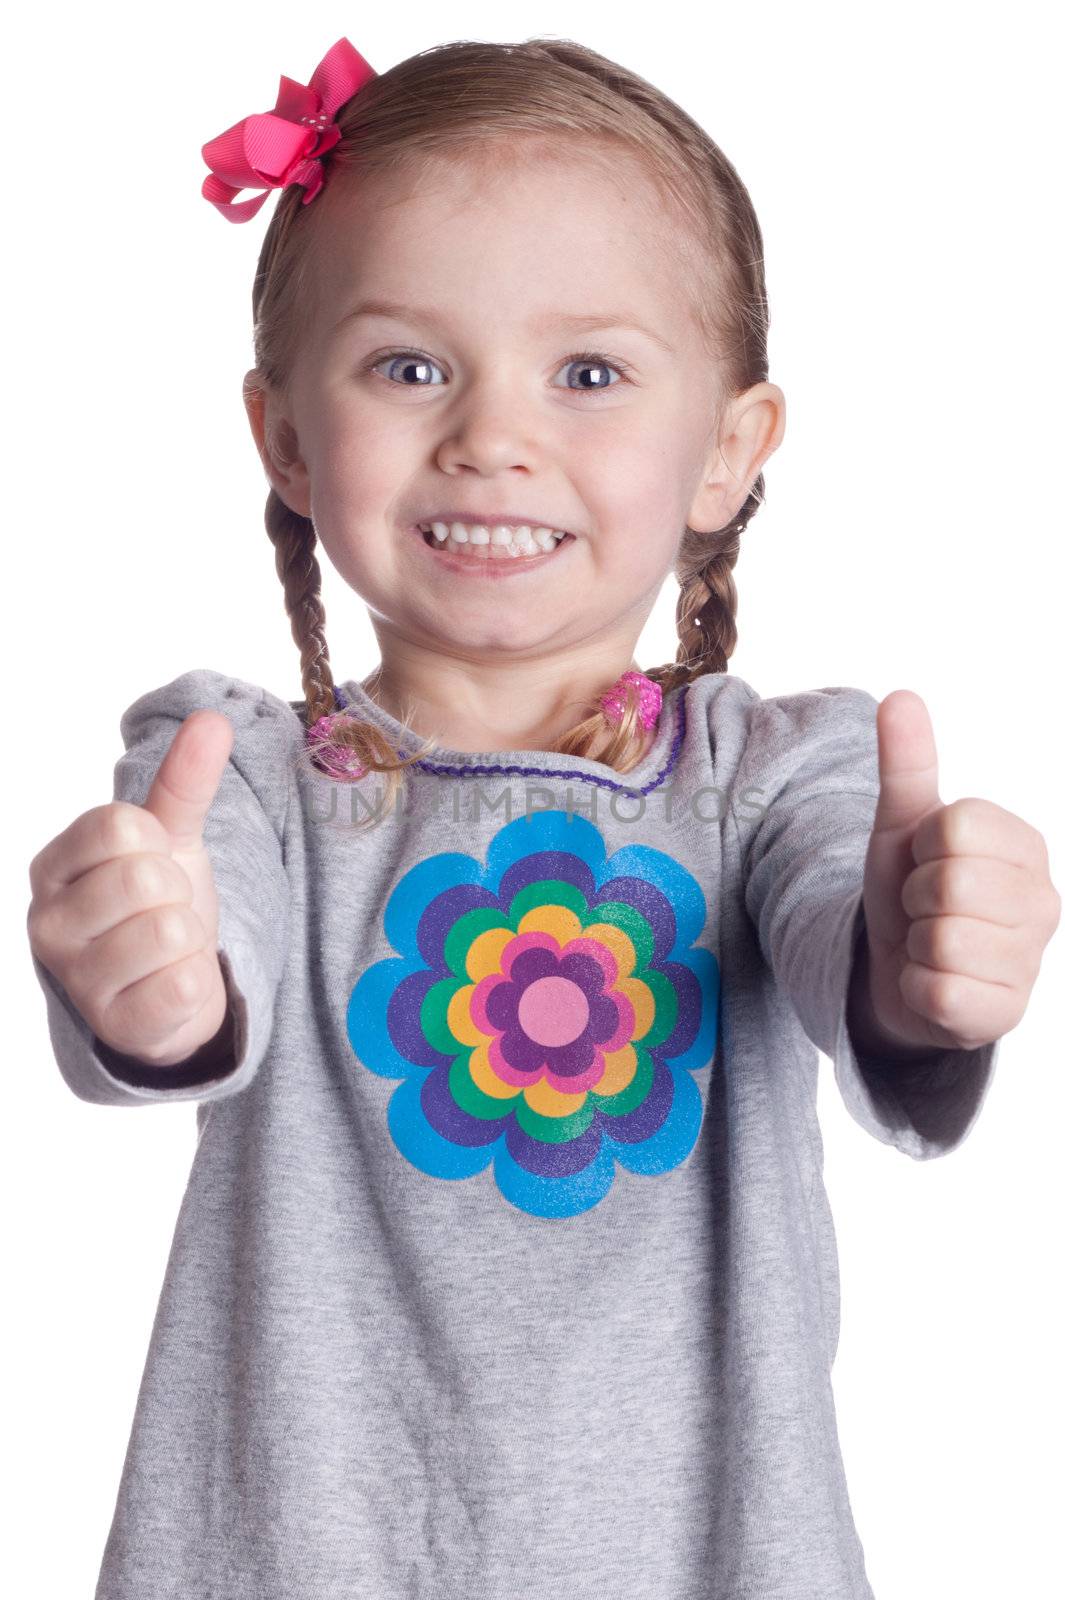 A cute young girl gives the viewer two thumbs up!  The thumbs are slightly out of focus which causes the viewers eye to be drawn to the excited look on the child's face.